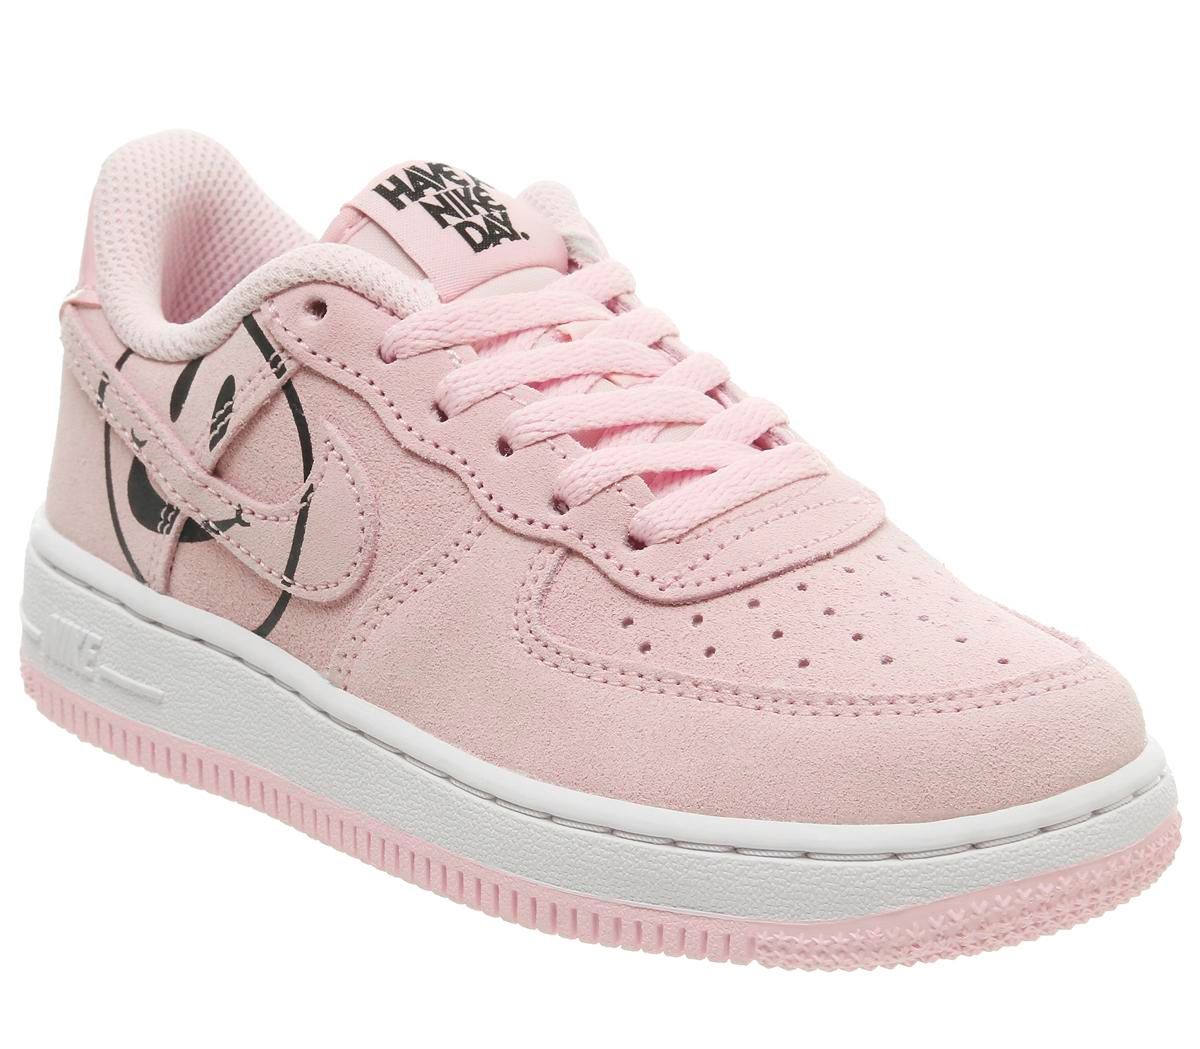 Nike Air Force 1 Lv8 Ps PINK FOAM WHITE 